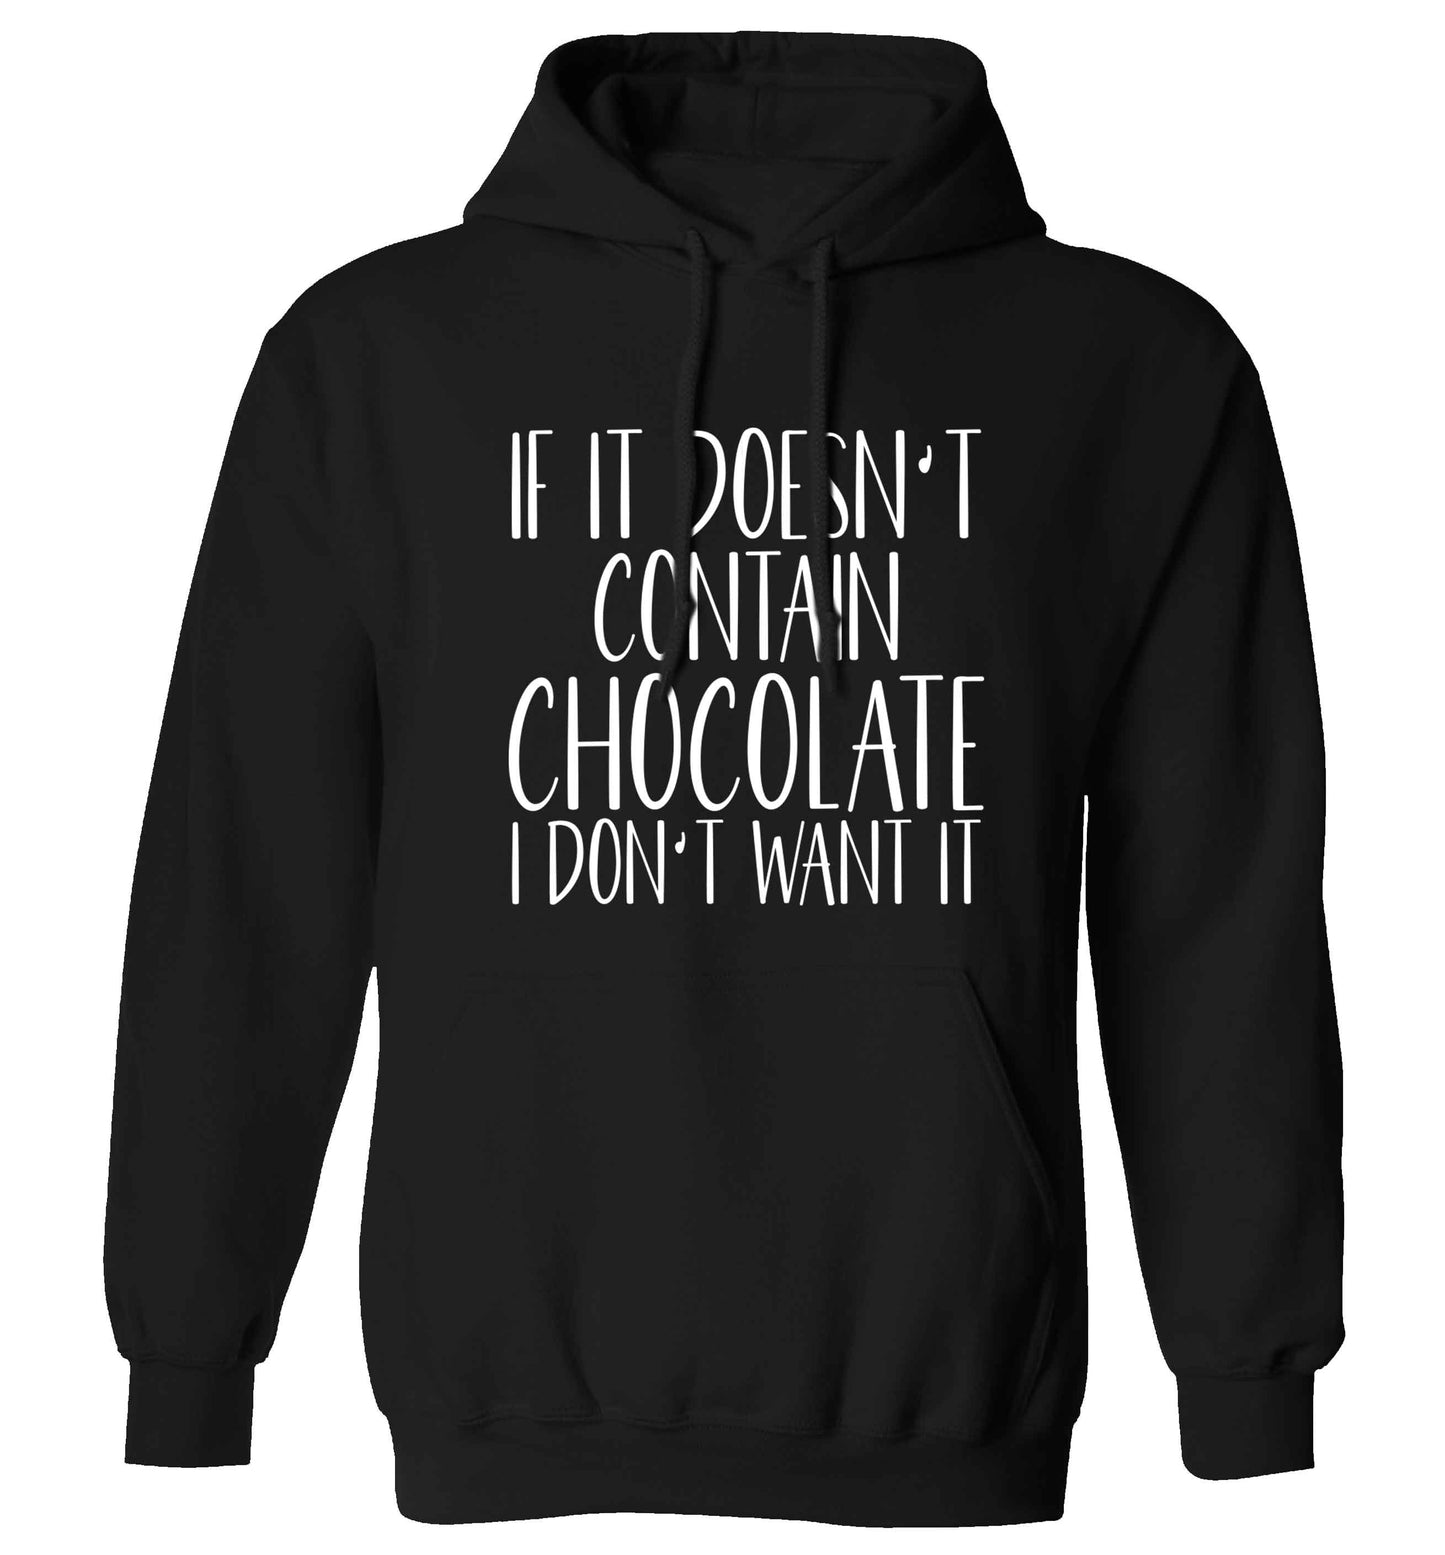 If it doesn't contain chocolate I don't want it adults unisex black hoodie 2XL